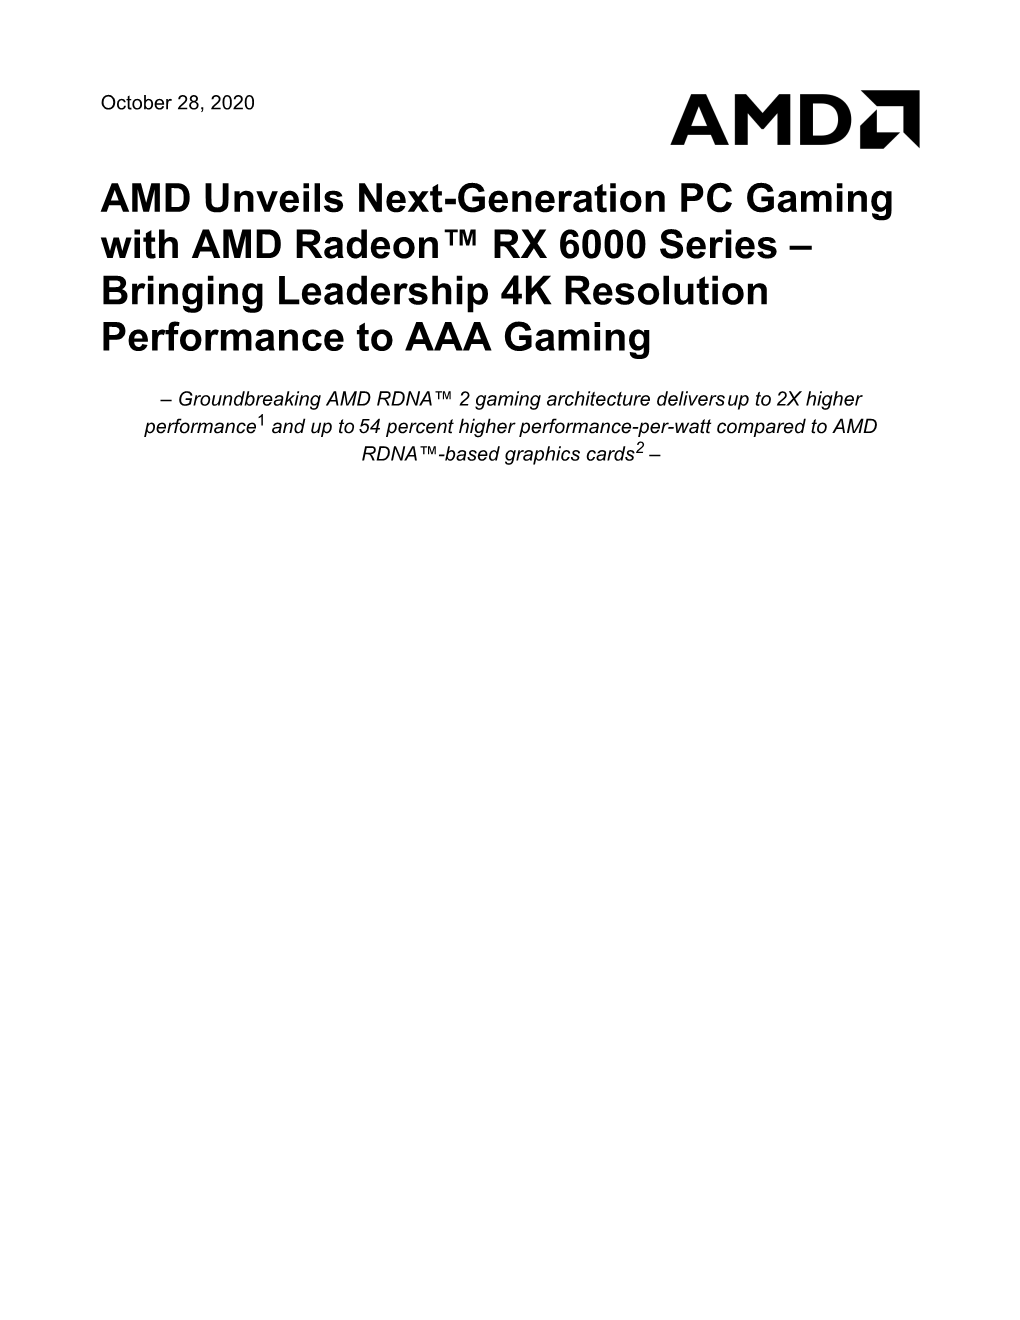 AMD Unveils Next-Generation PC Gaming with AMD Radeon™ RX 6000 Series – Bringing Leadership 4K Resolution Performance to AAA Gaming